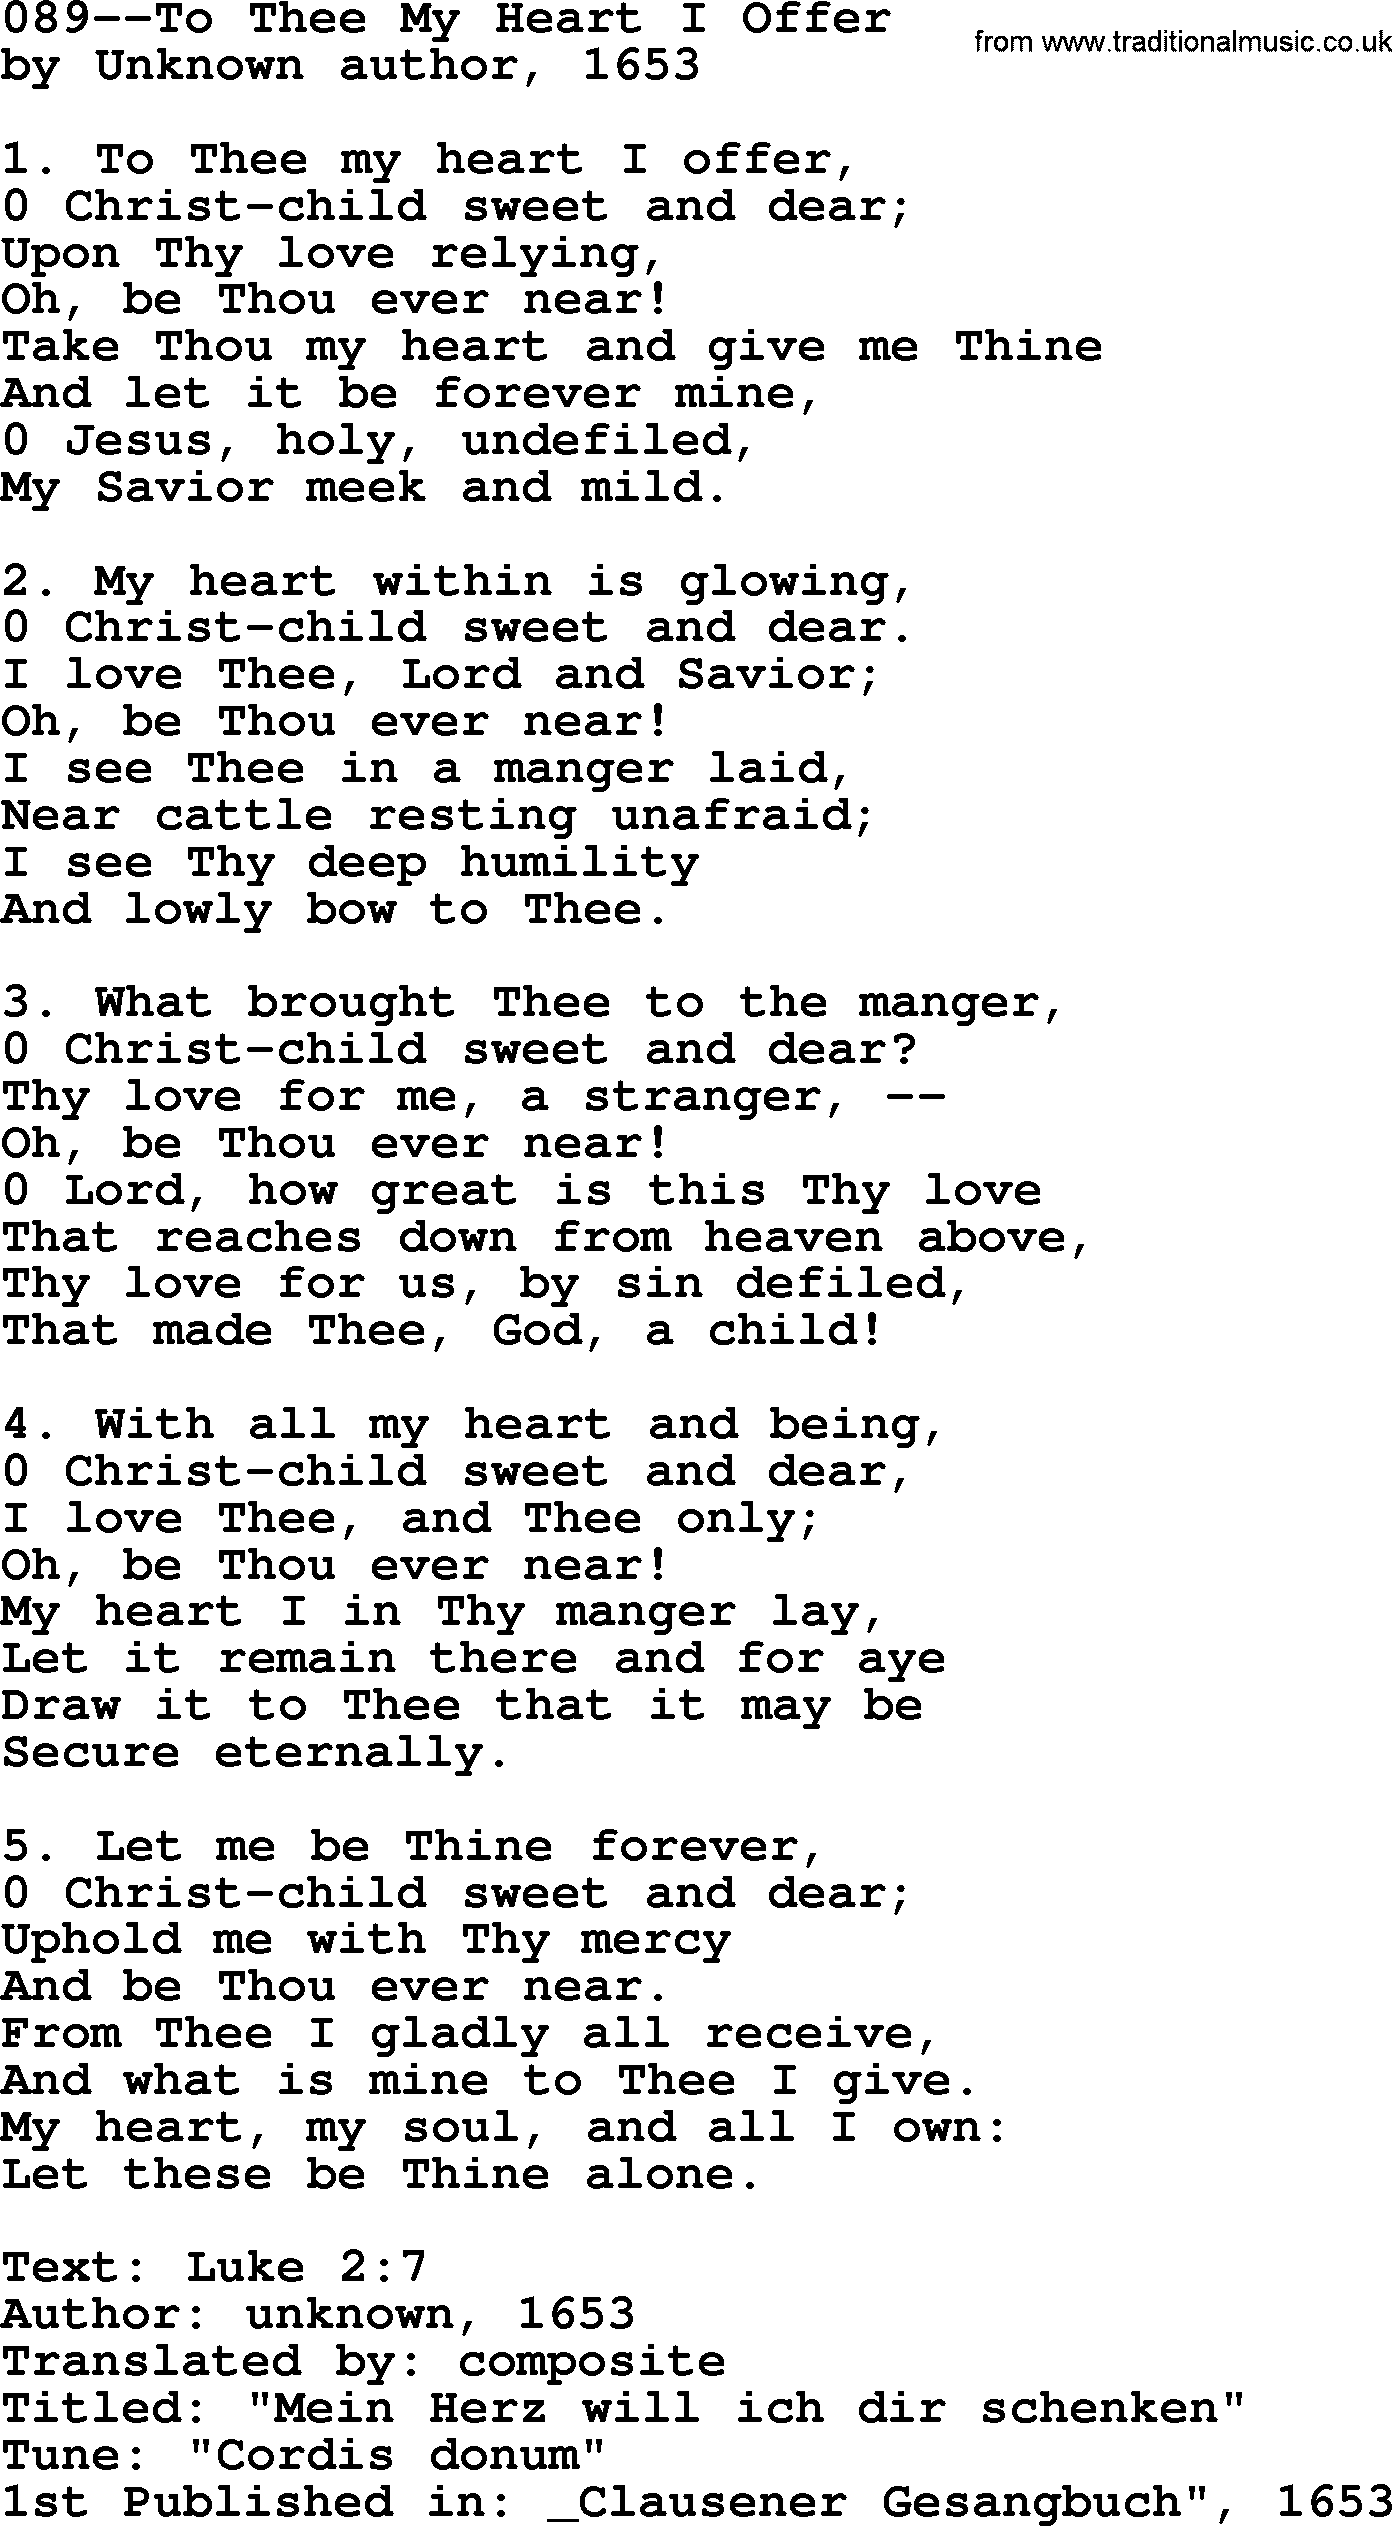 Lutheran Hymn: 089--To Thee My Heart I Offer.txt lyrics with PDF